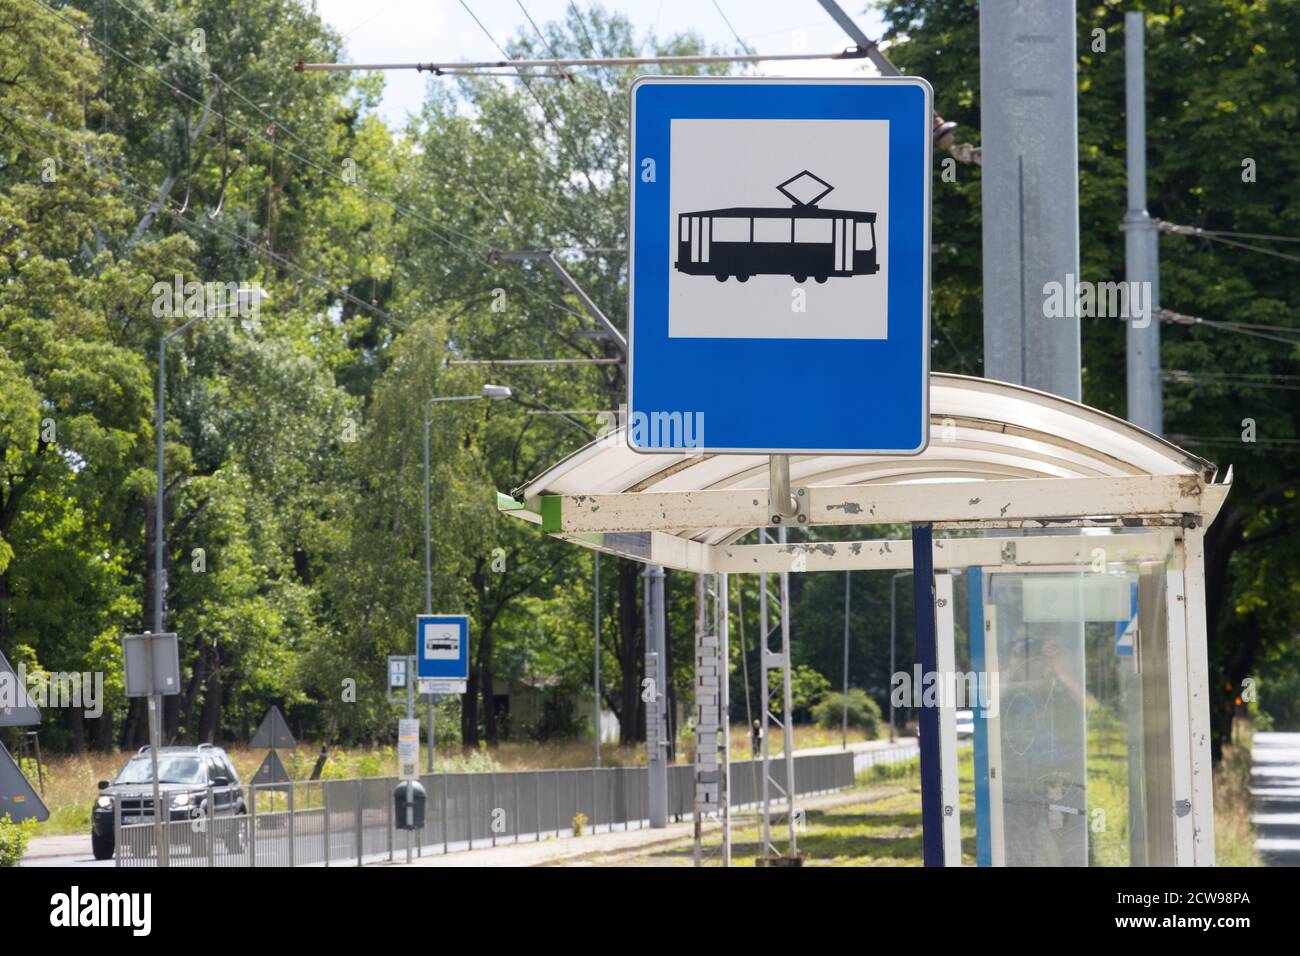 Tram stop sign in Poland Stock Photo